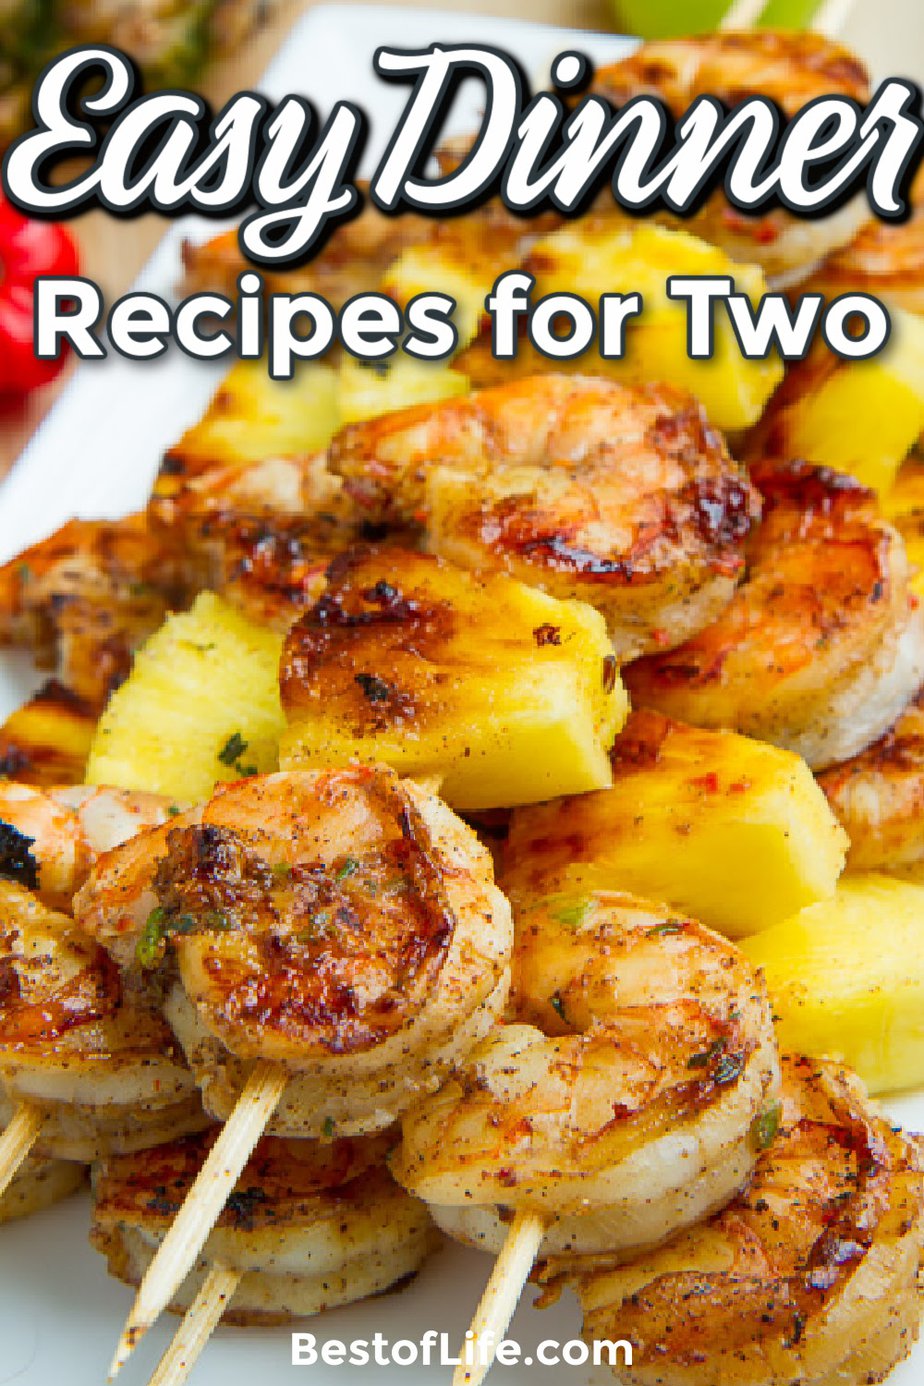 Cooking isn't always a fun thing to do but using easy dinner recipes for two can make a night at home fun and romantic. Romantic Dinner Recipes |Romantic Meals for Two | Dinner Recipes | Date Night Recipes | Dinner Date Ideas #datenight #romanticrecipes via @thebestoflife